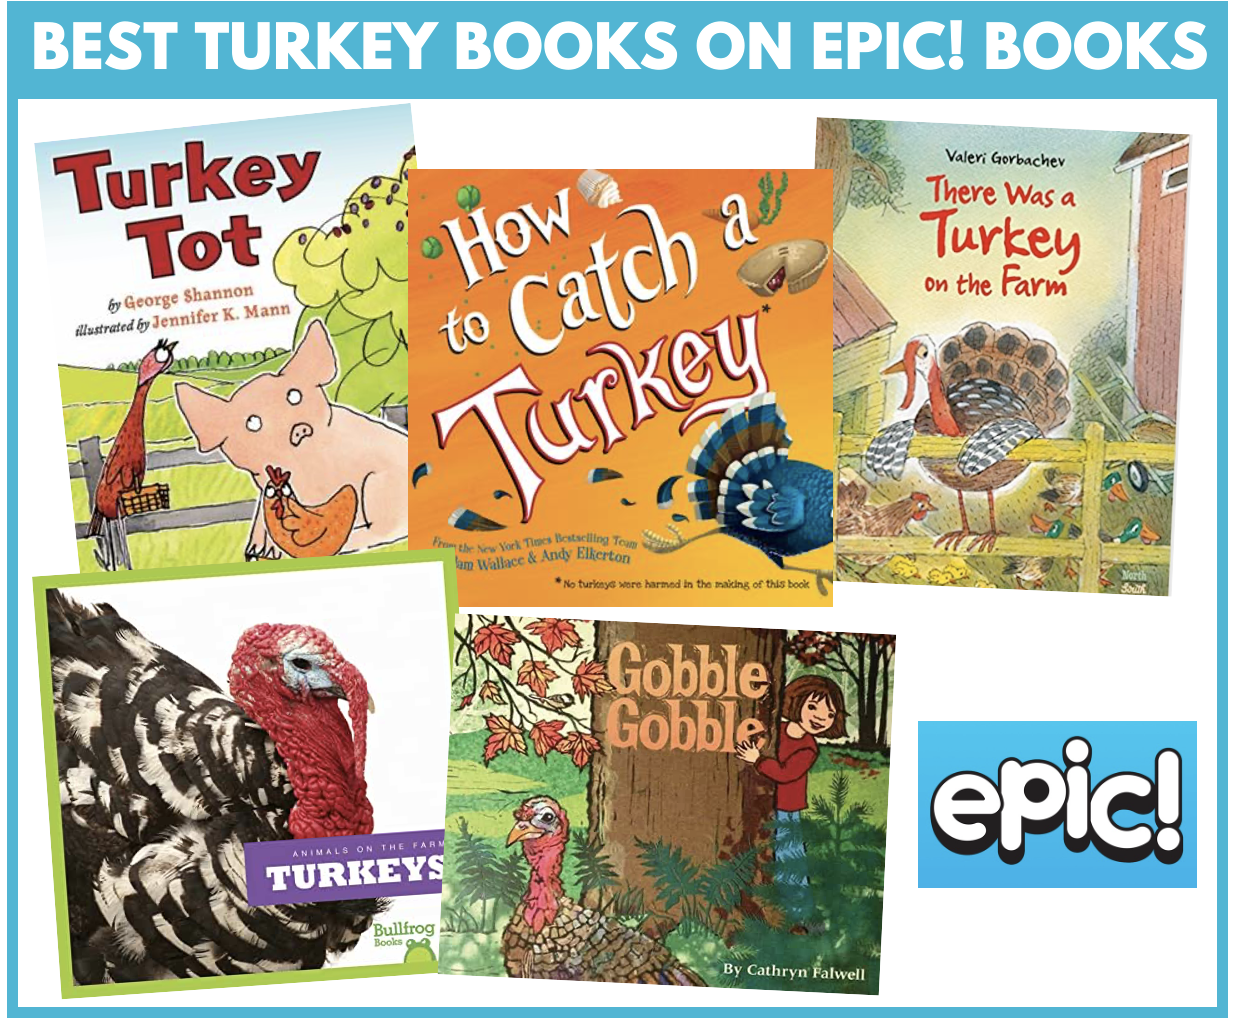 The Best Fiction and Non-Fiction Turkey Books